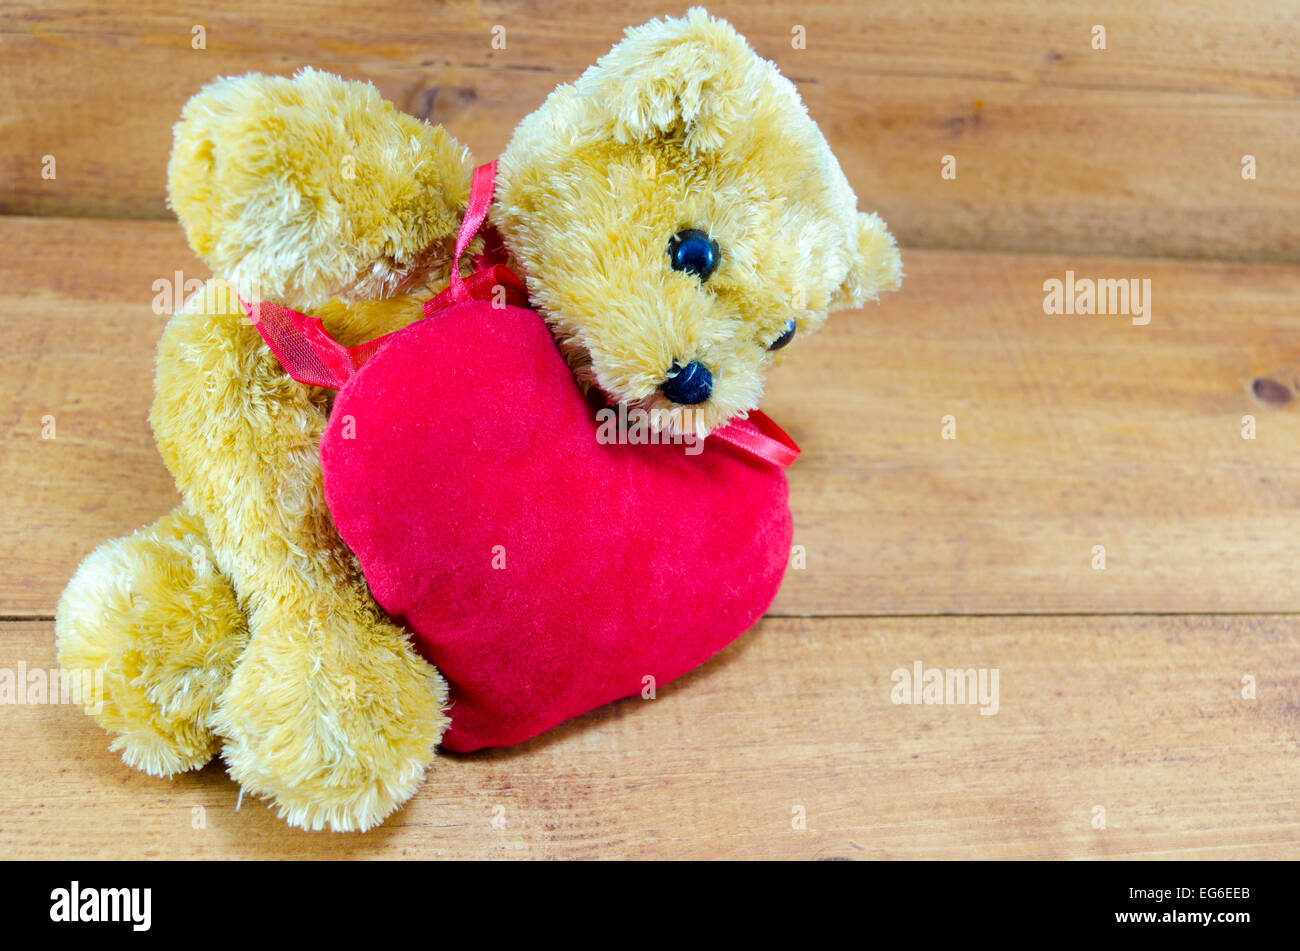 Big teddy bear lying on a red heart placed on a wooden table Stock Photo